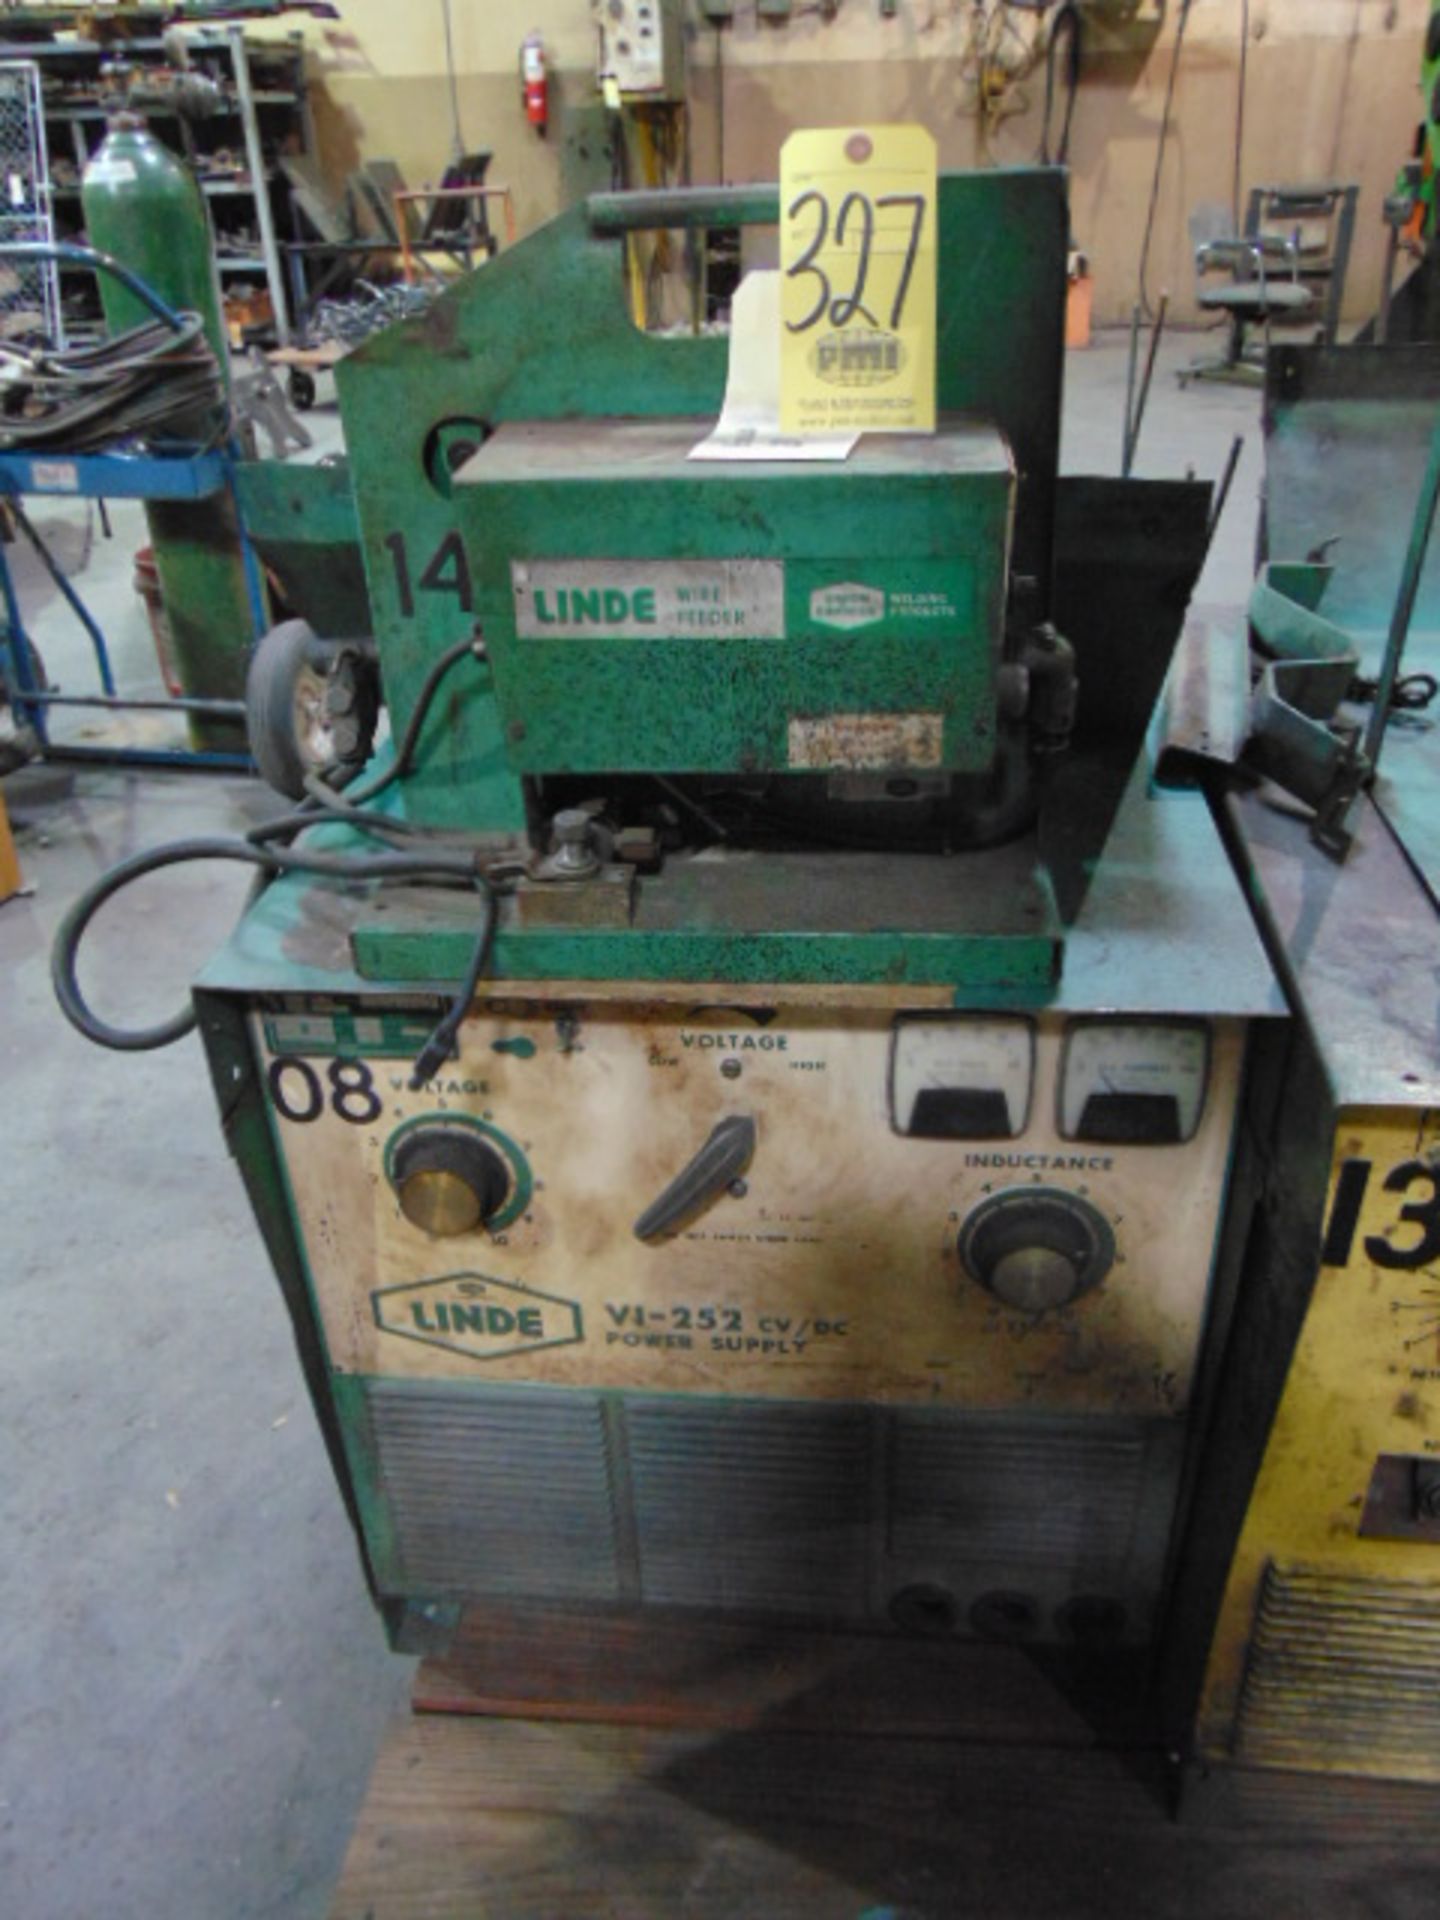 MIG WELDER, LINDE VI252 WELDING POWER SOURCE, 250 amps @ 37 v., 100% duty cycle. w/ wire feed (Note: